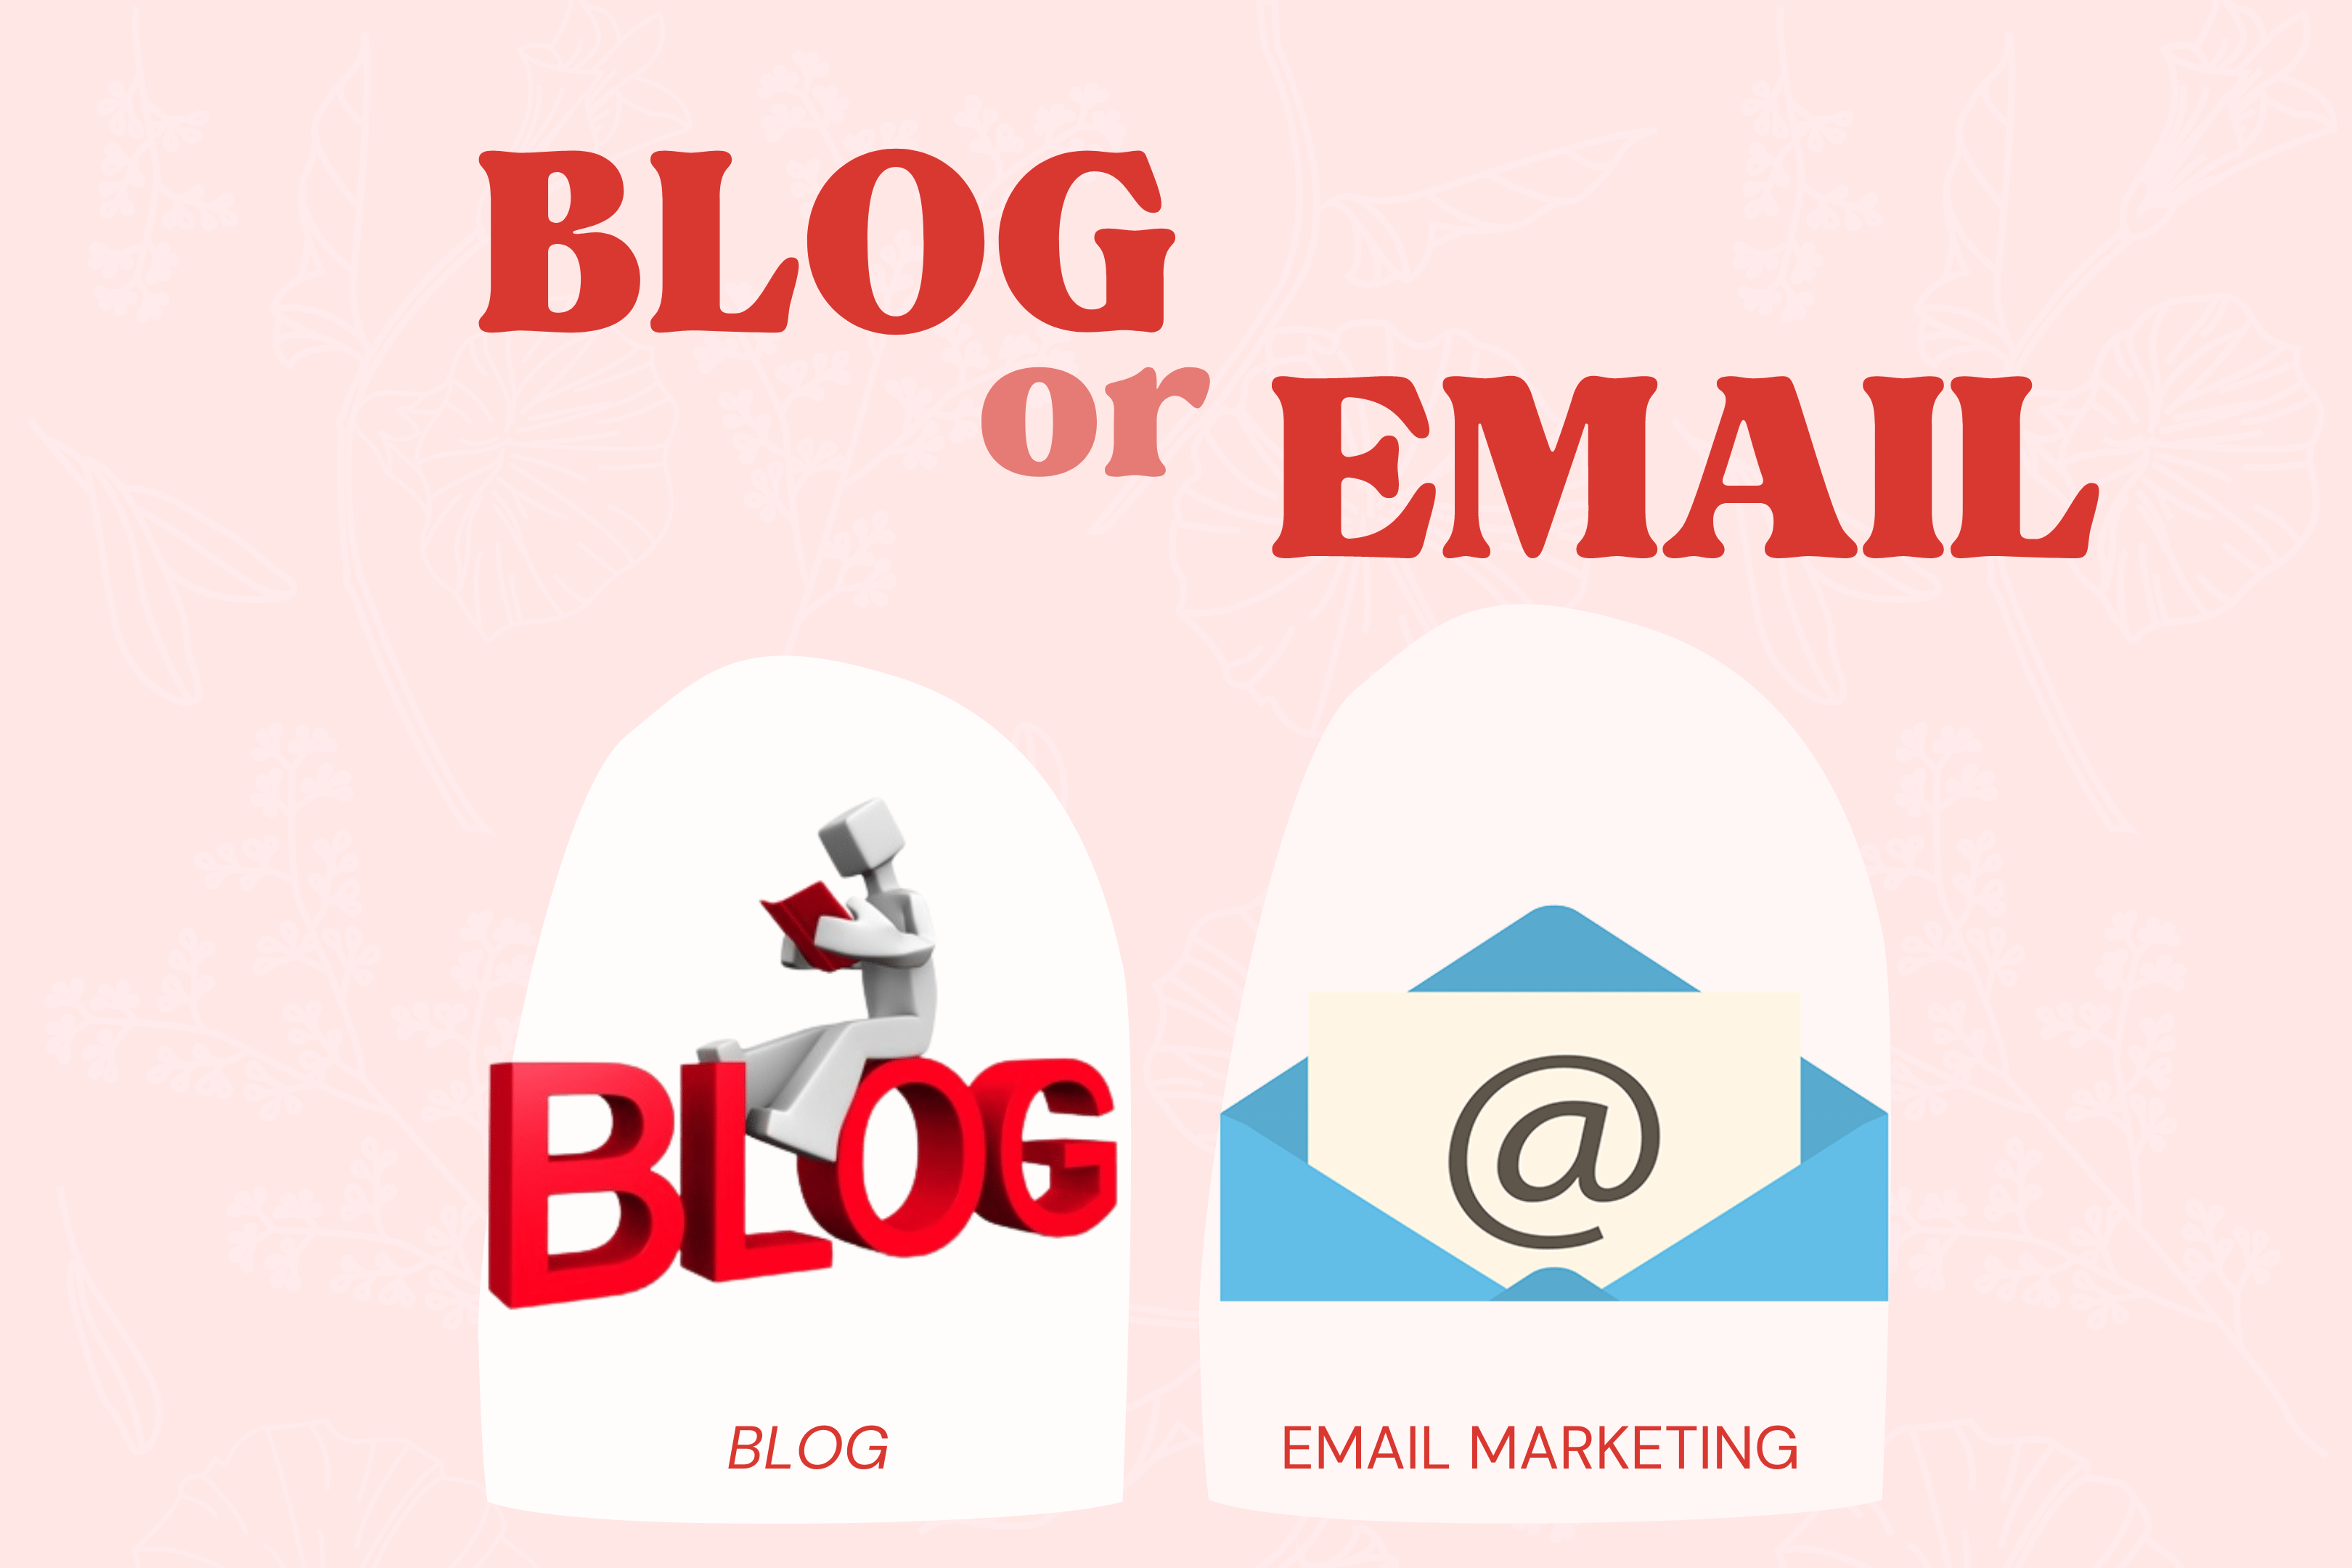 Should You Use Blog or Email Marketing For Your Brand?